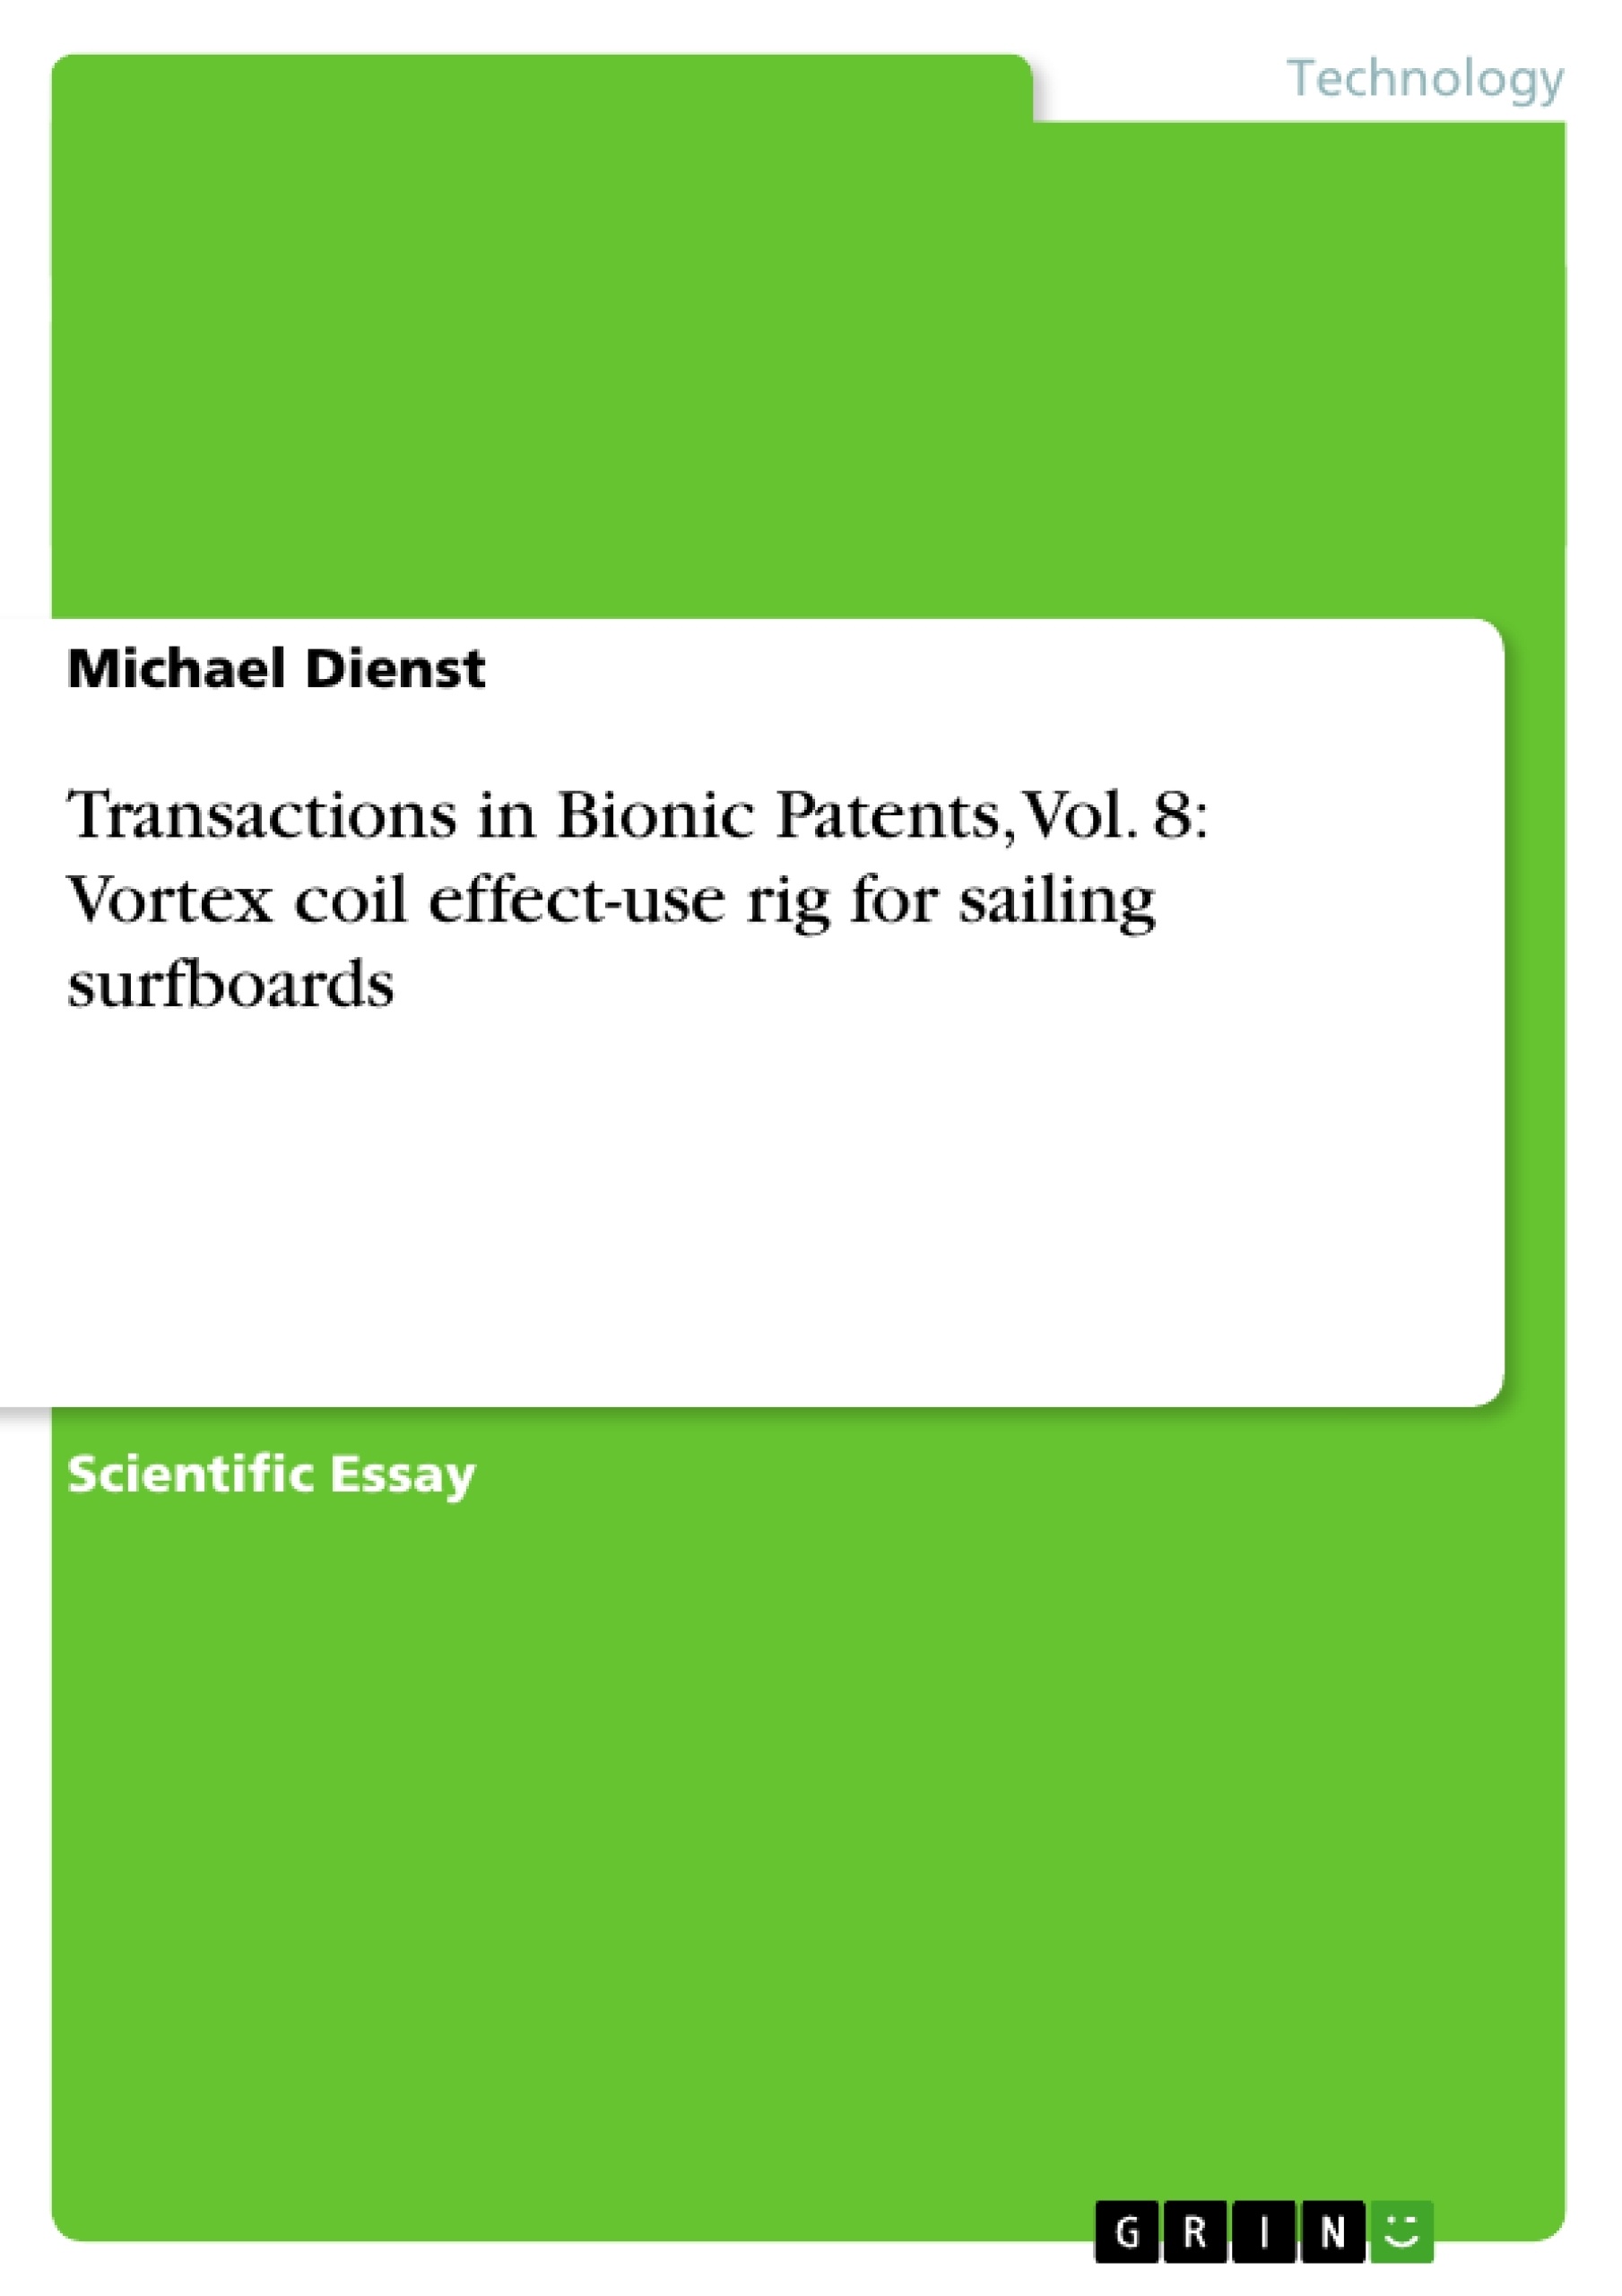 Titre: Transactions in Bionic Patents, Vol. 8: Vortex coil effect-use rig for sailing surfboards